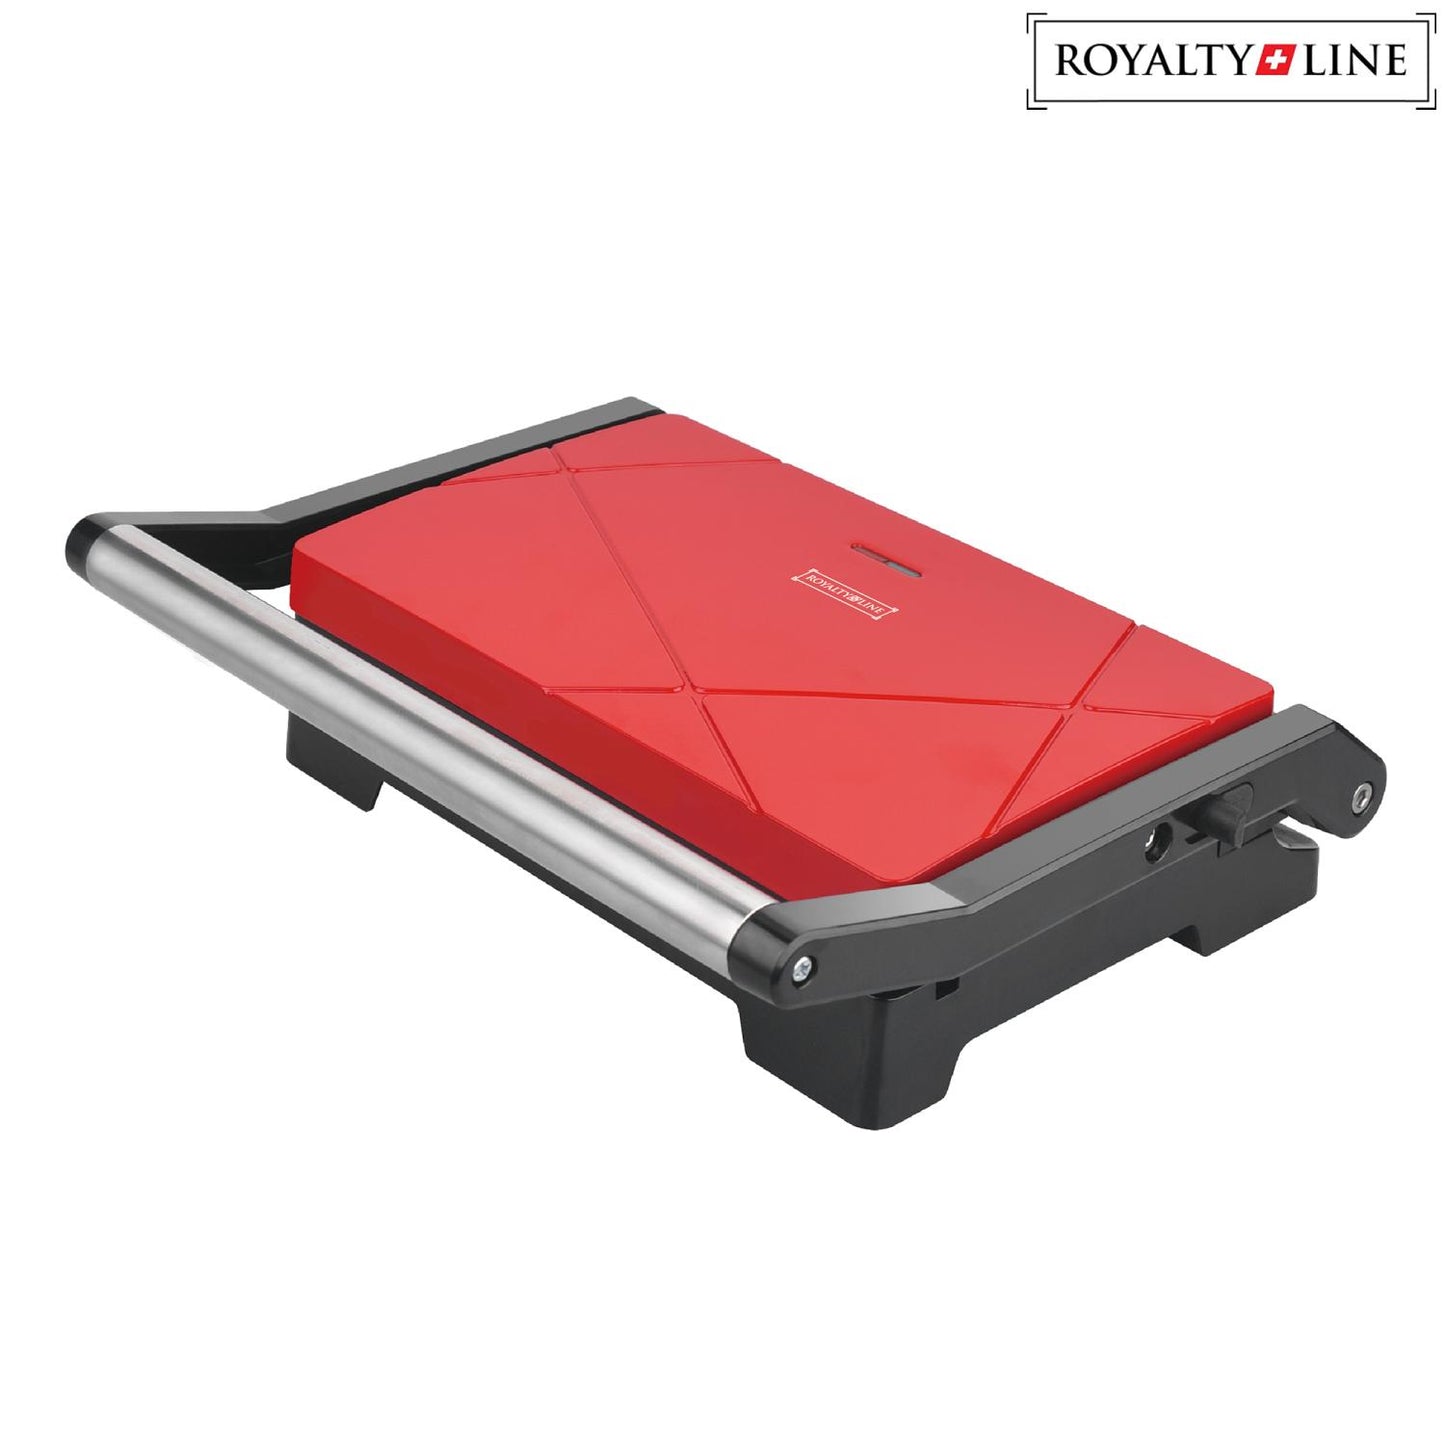 Royalty Line Toaster Grill 1000W Red